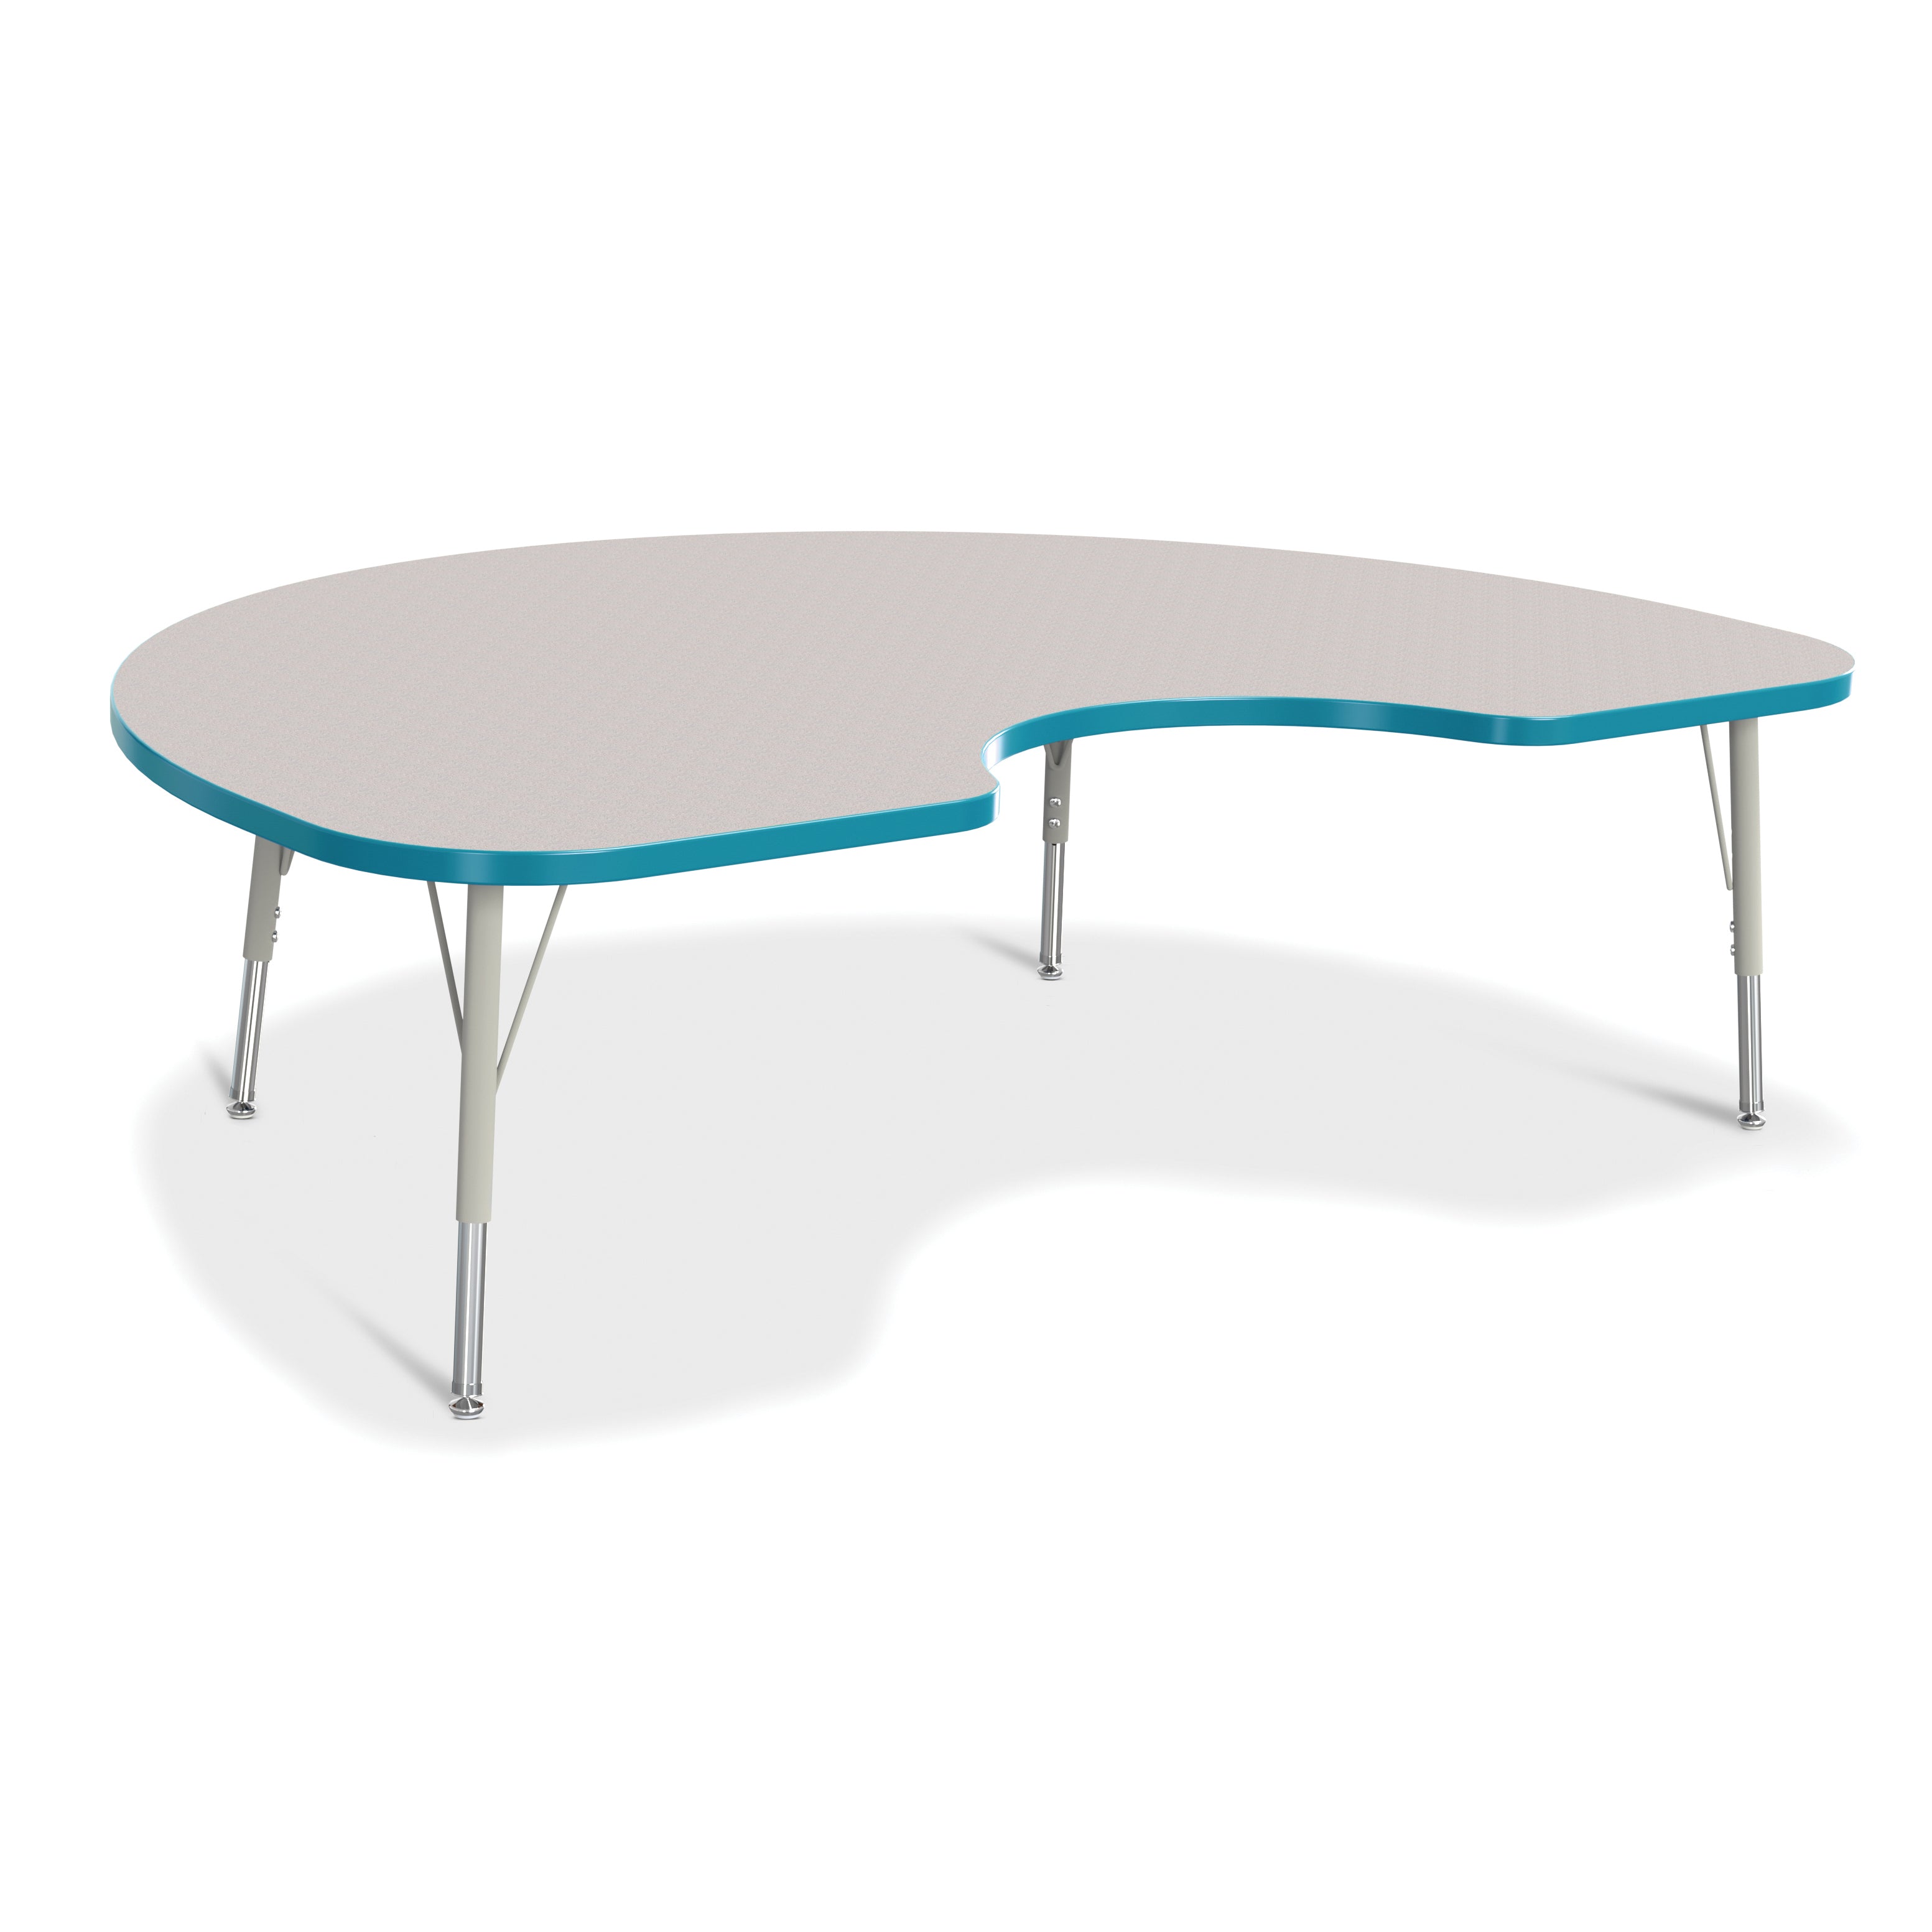 6423JCE005, Berries Kidney Activity Table - 48" X 72", E-height - Freckled Gray/Teal/Gray